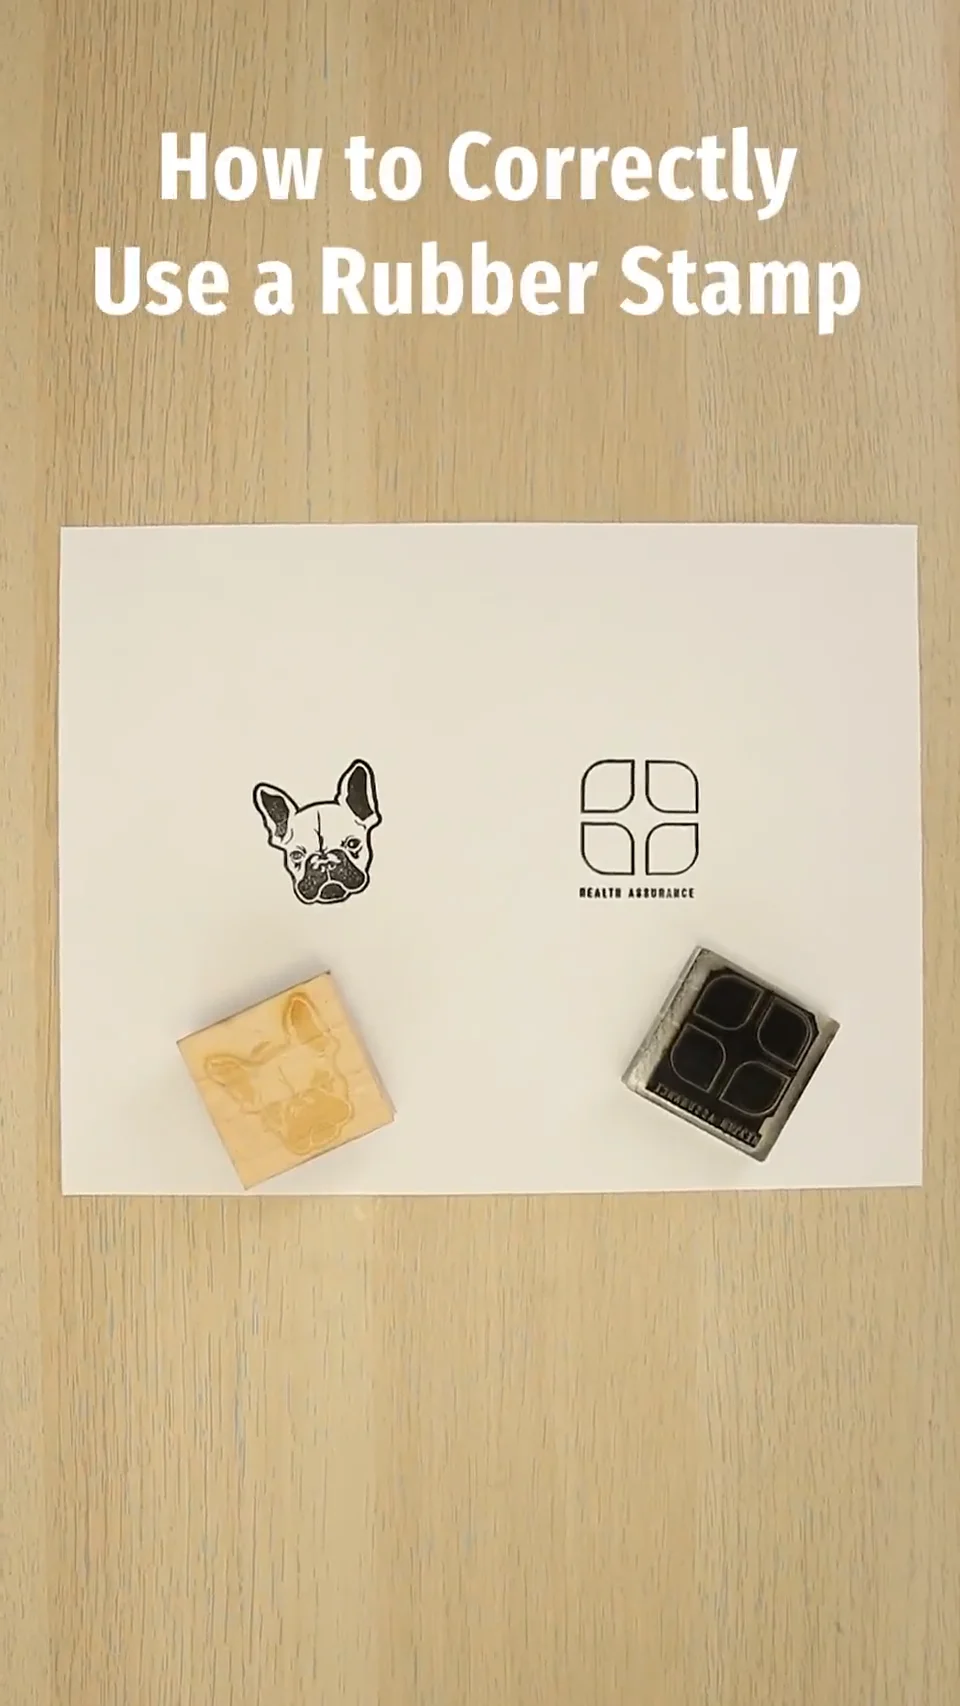 How To Choose The Right Ink Pad For Your Rubber Stamps